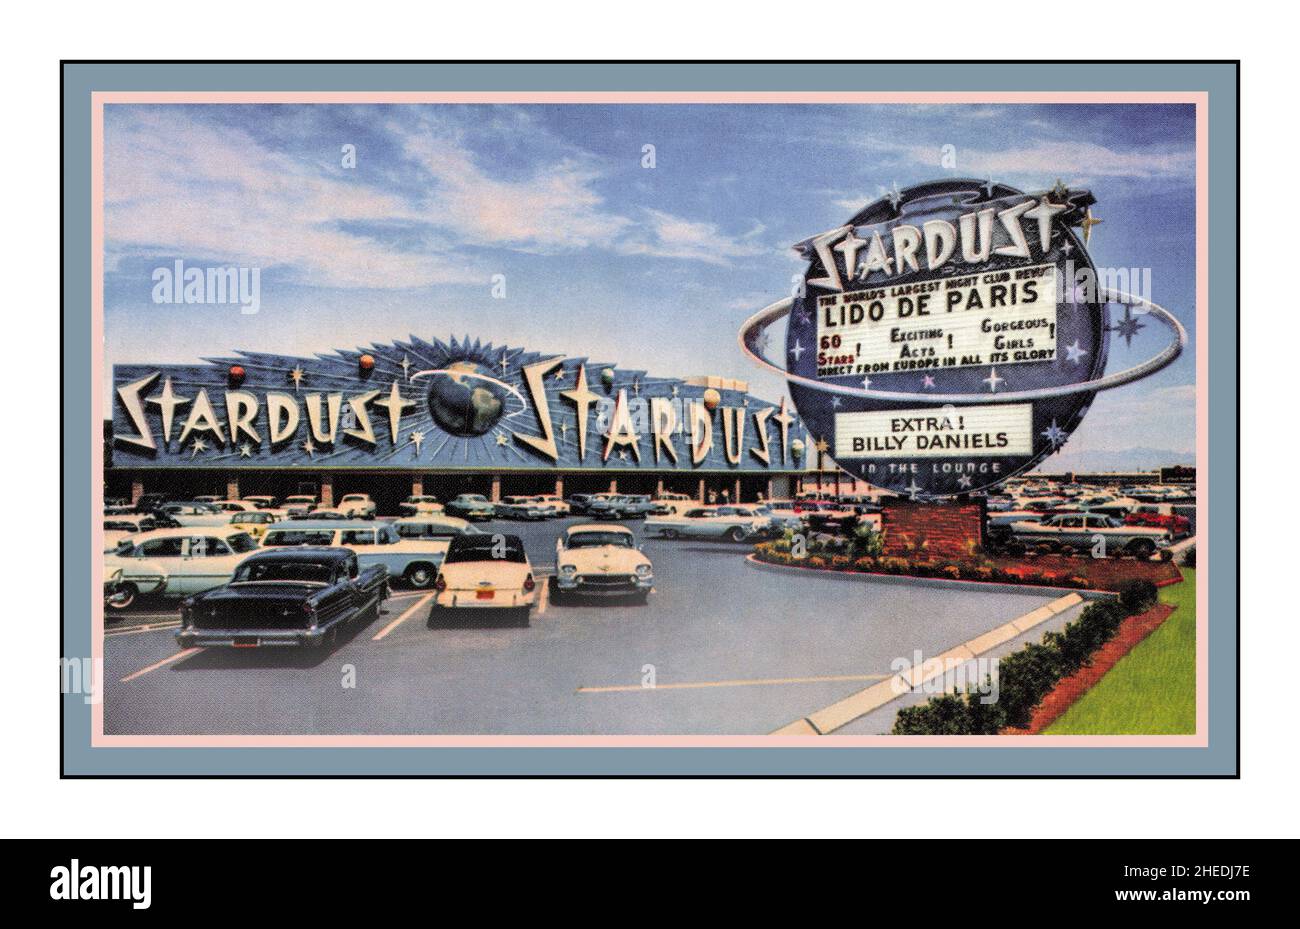 Las Vegas  Early 1960s postcard showing the Stardust hotel and casino and its distinctive round roadside sign. The building and roadside signs date back to the opening of the hotel in 1958. 'The Stardust' Lido de Paris night club revue vintage postcard retro 1950s /1960s Nevada USA Stock Photo